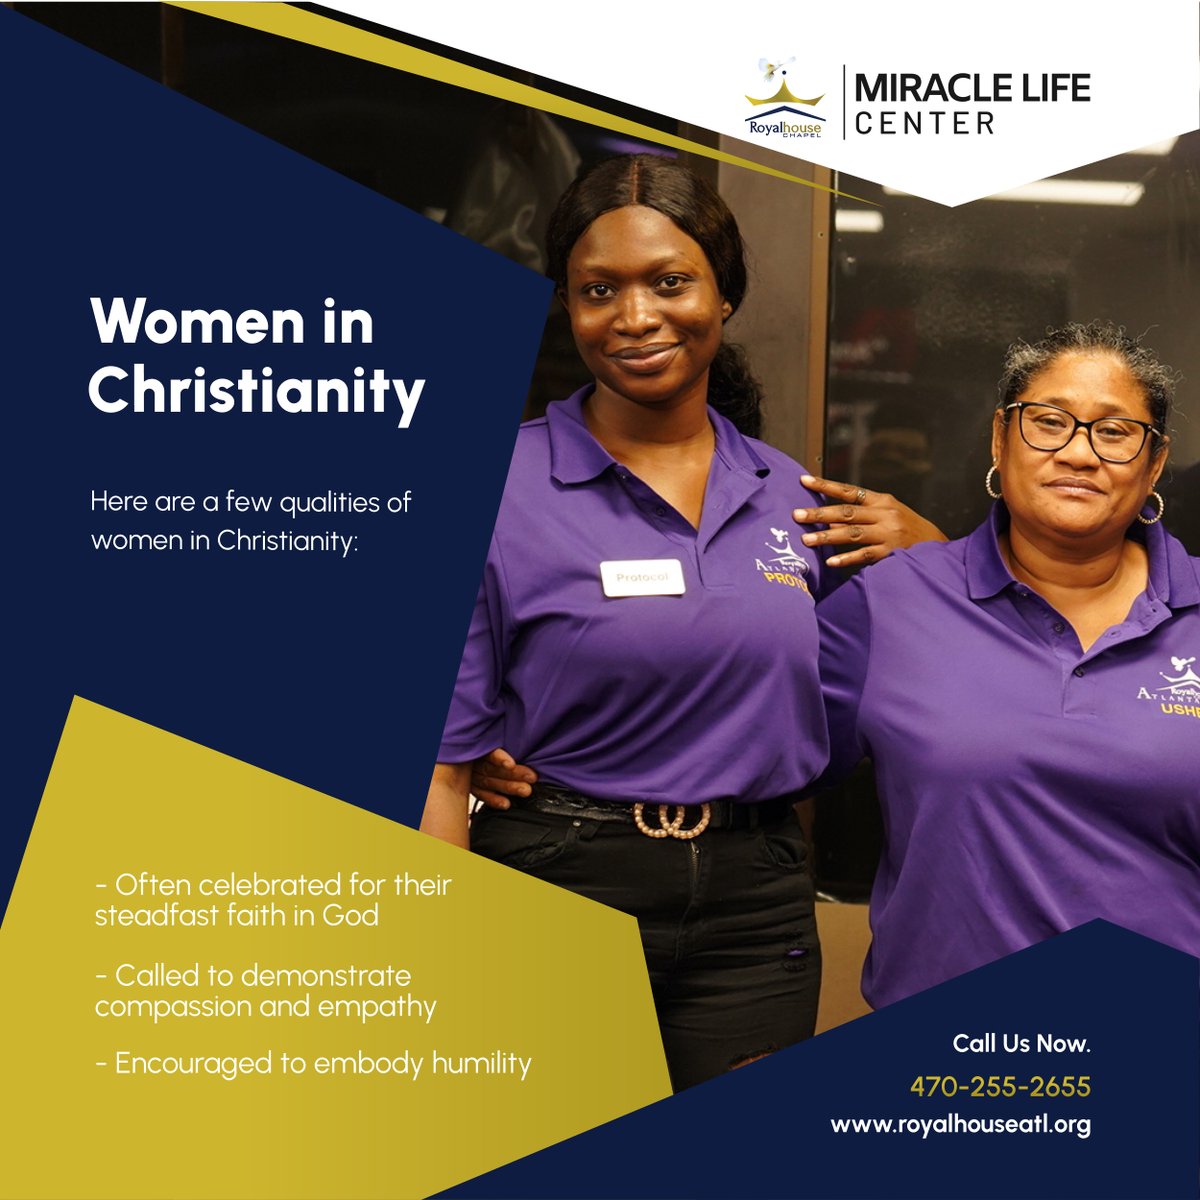 Explore and grow in these qualities with our Women's Ministry at Royalhouse Chapel ATL. 

Join us in fellowship, study, and service as we support one another in our faith journey. 

#TuckerGA #ReligiousOrganization #ChristianWomen